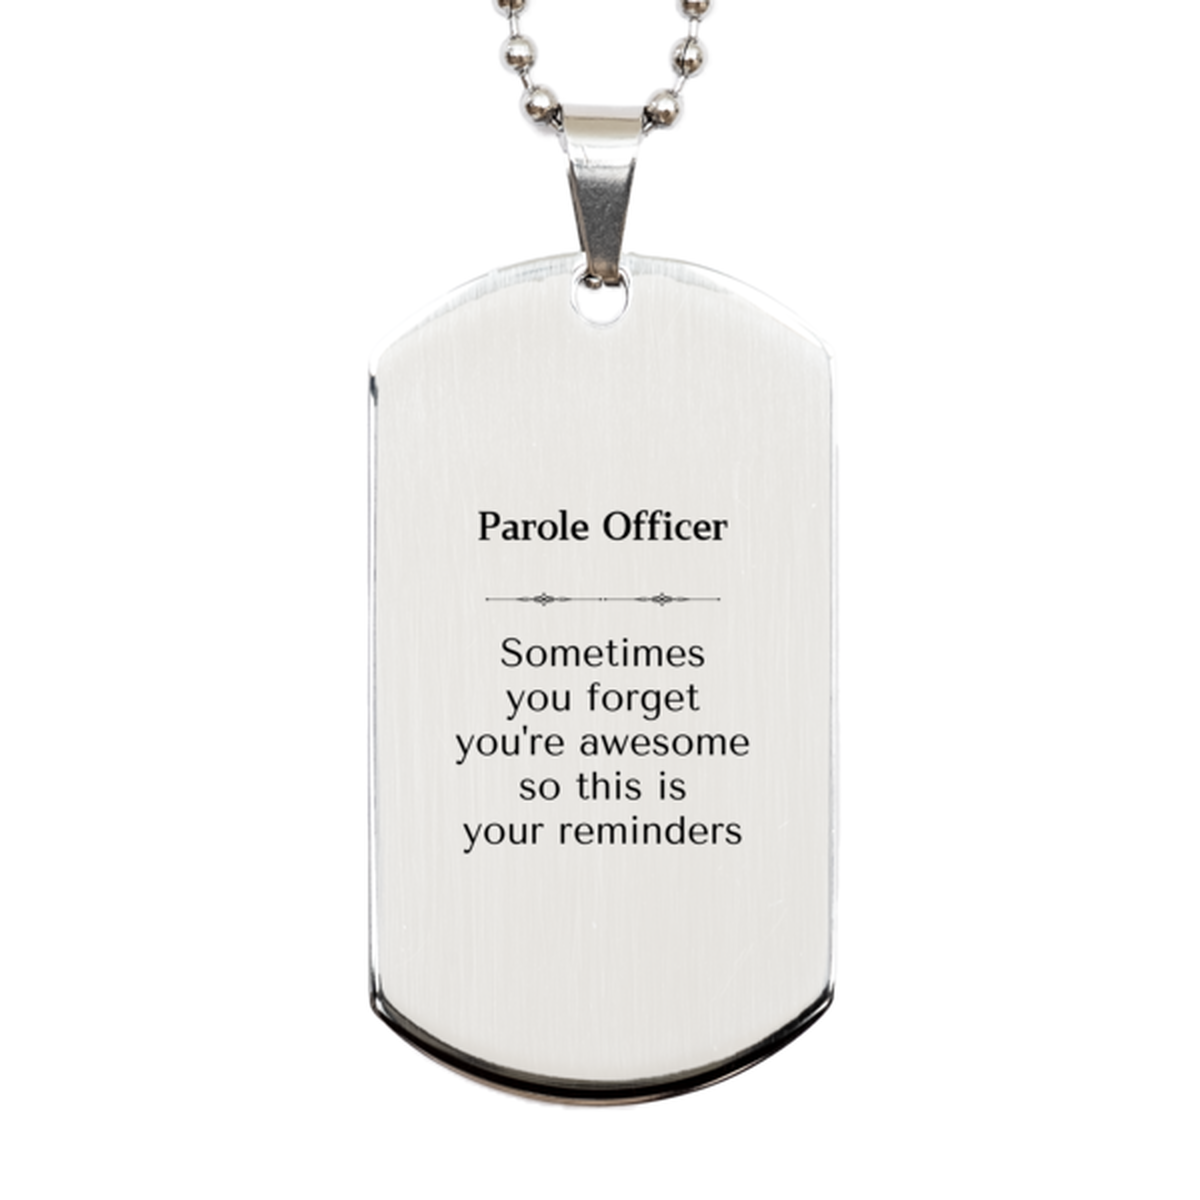 Sentimental Parole Officer Silver Dog Tag, Parole Officer Sometimes you forget you're awesome so this is your reminders, Graduation Christmas Birthday Gifts for Parole Officer, Men, Women, Coworkers